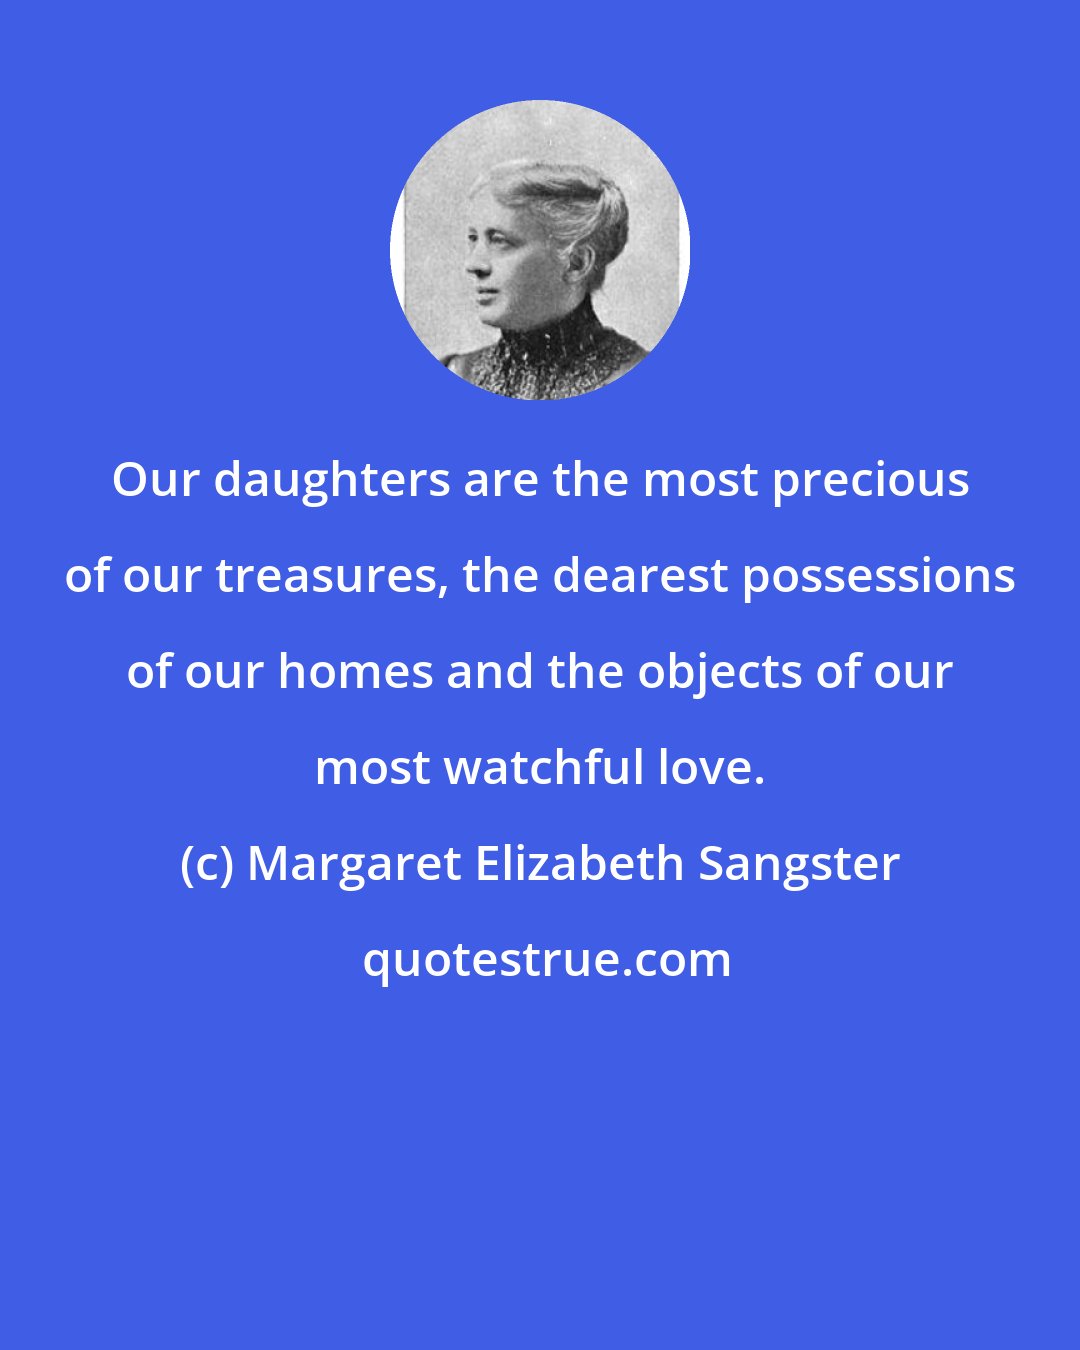 Margaret Elizabeth Sangster: Our daughters are the most precious of our treasures, the dearest possessions of our homes and the objects of our most watchful love.